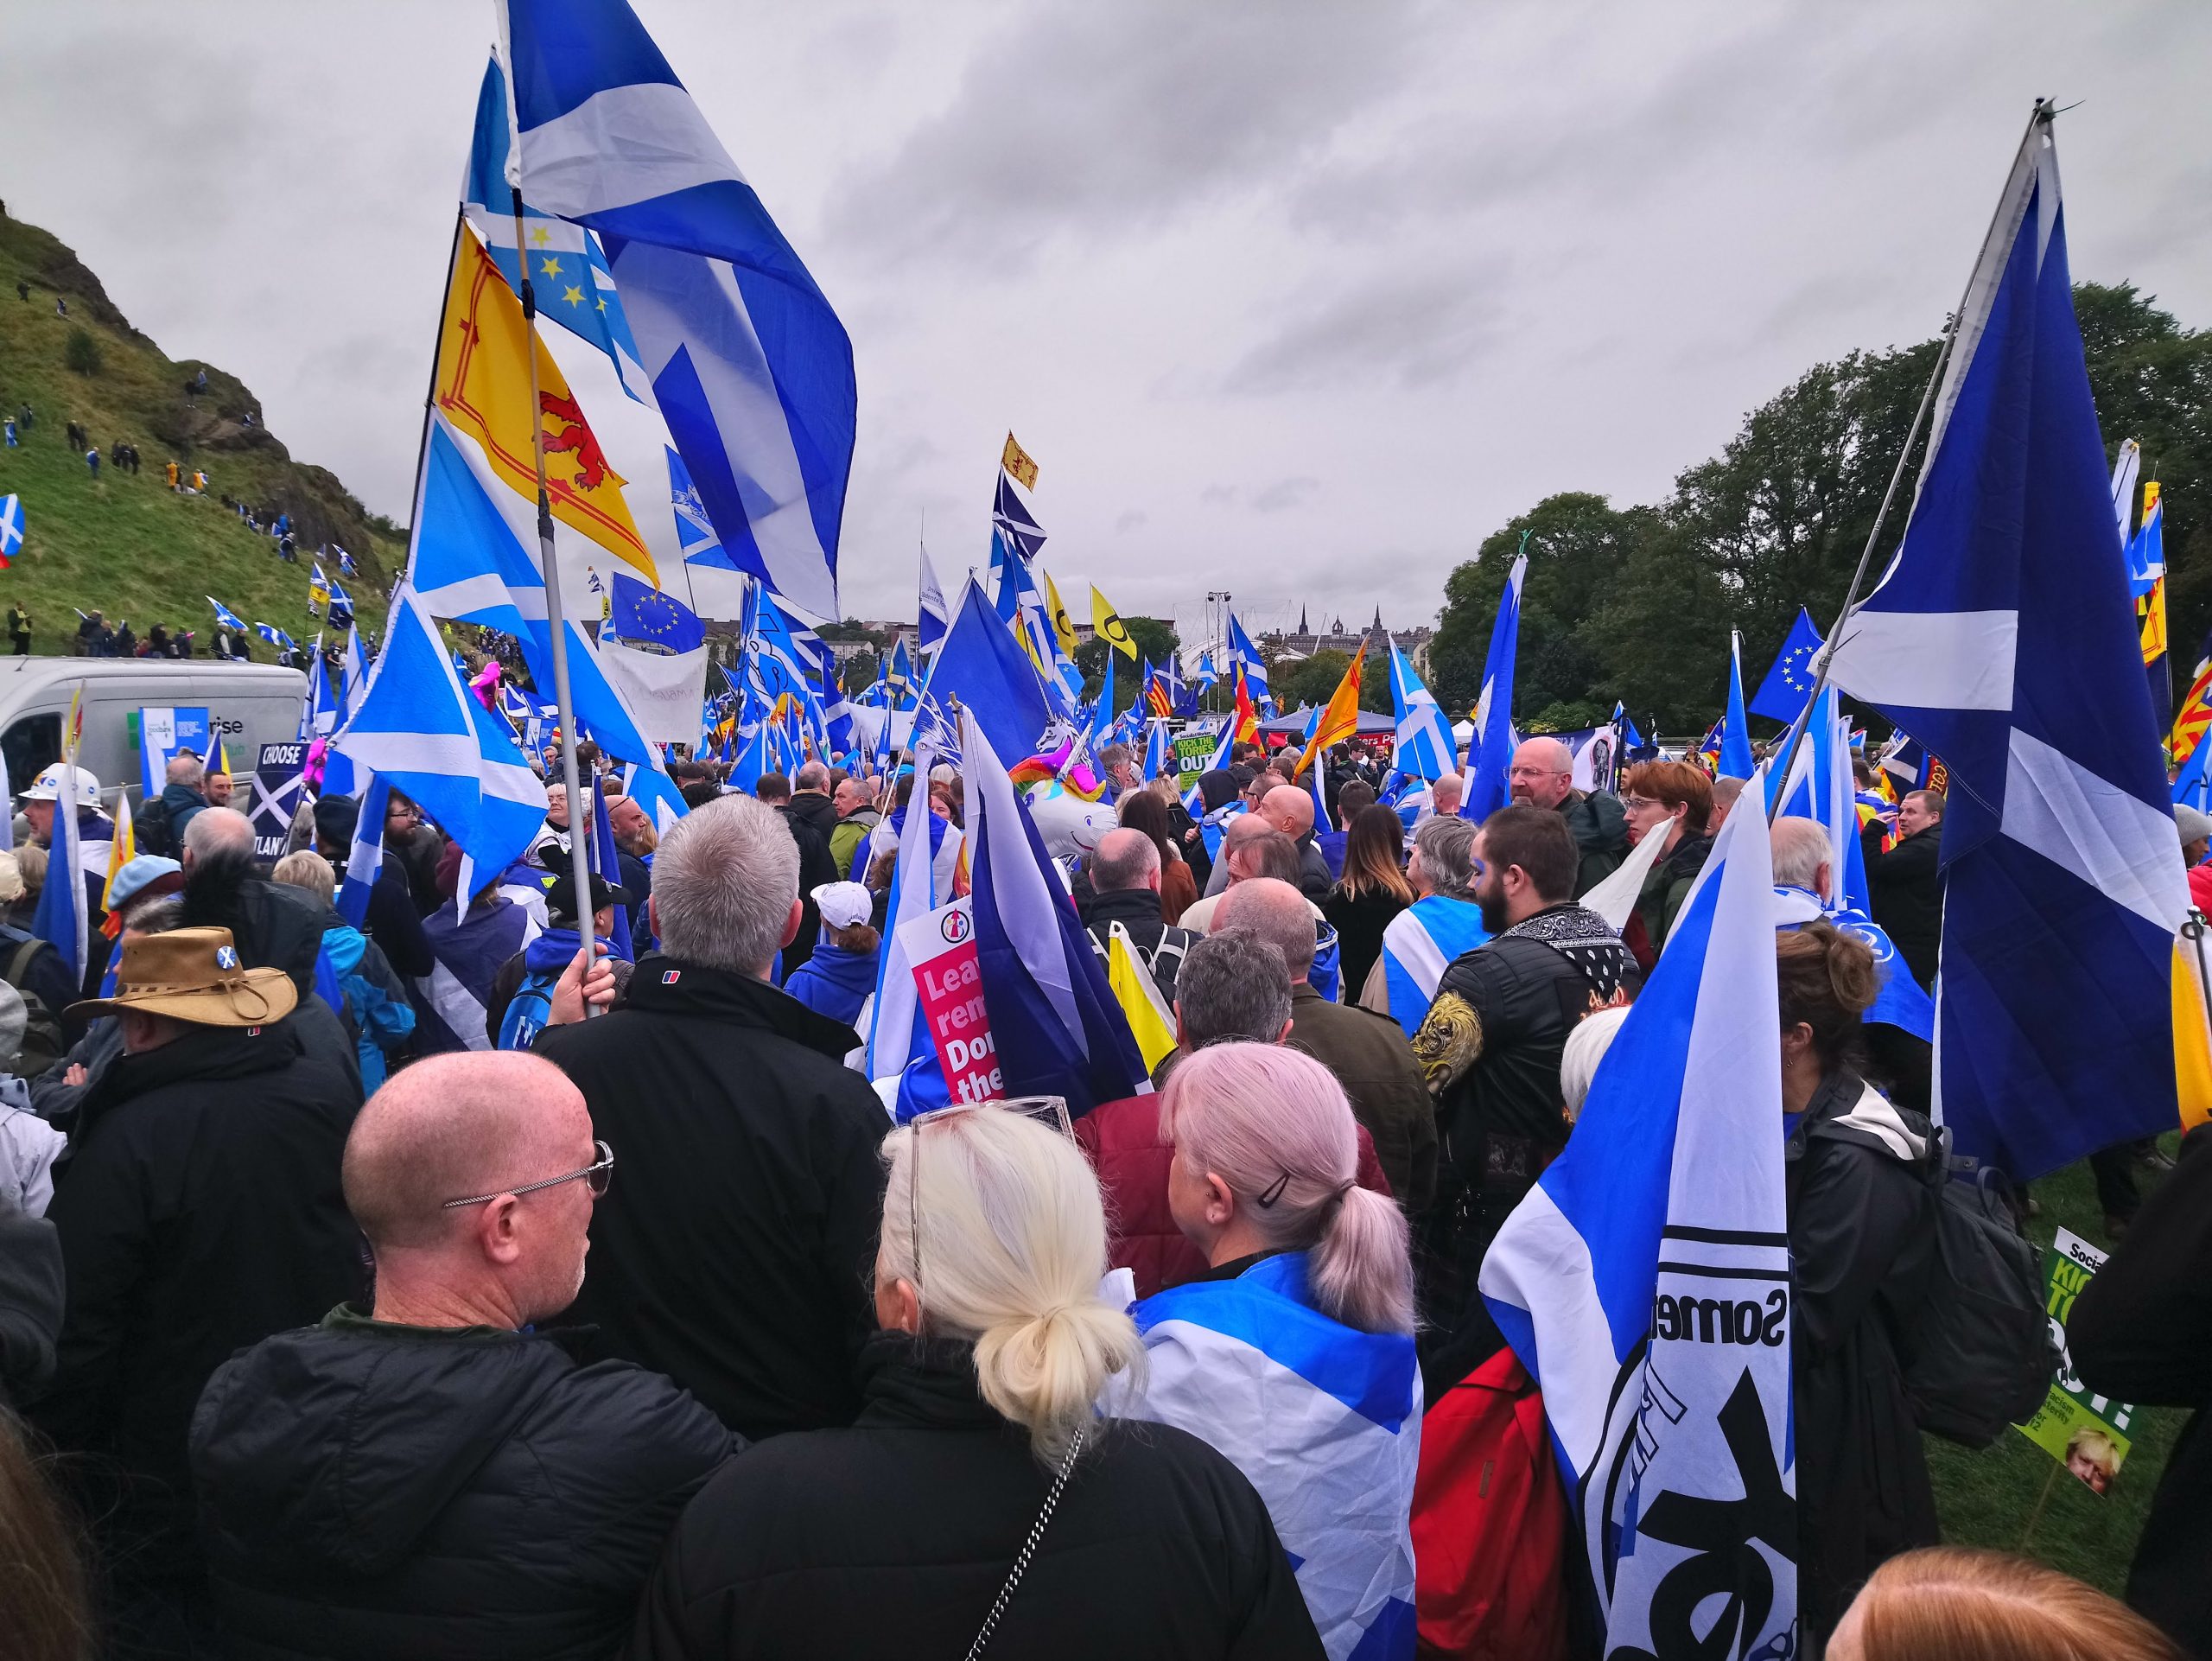 Edinburgh Independence March 2019, a crowd of people holding Scotland flags and marching in Holyrood